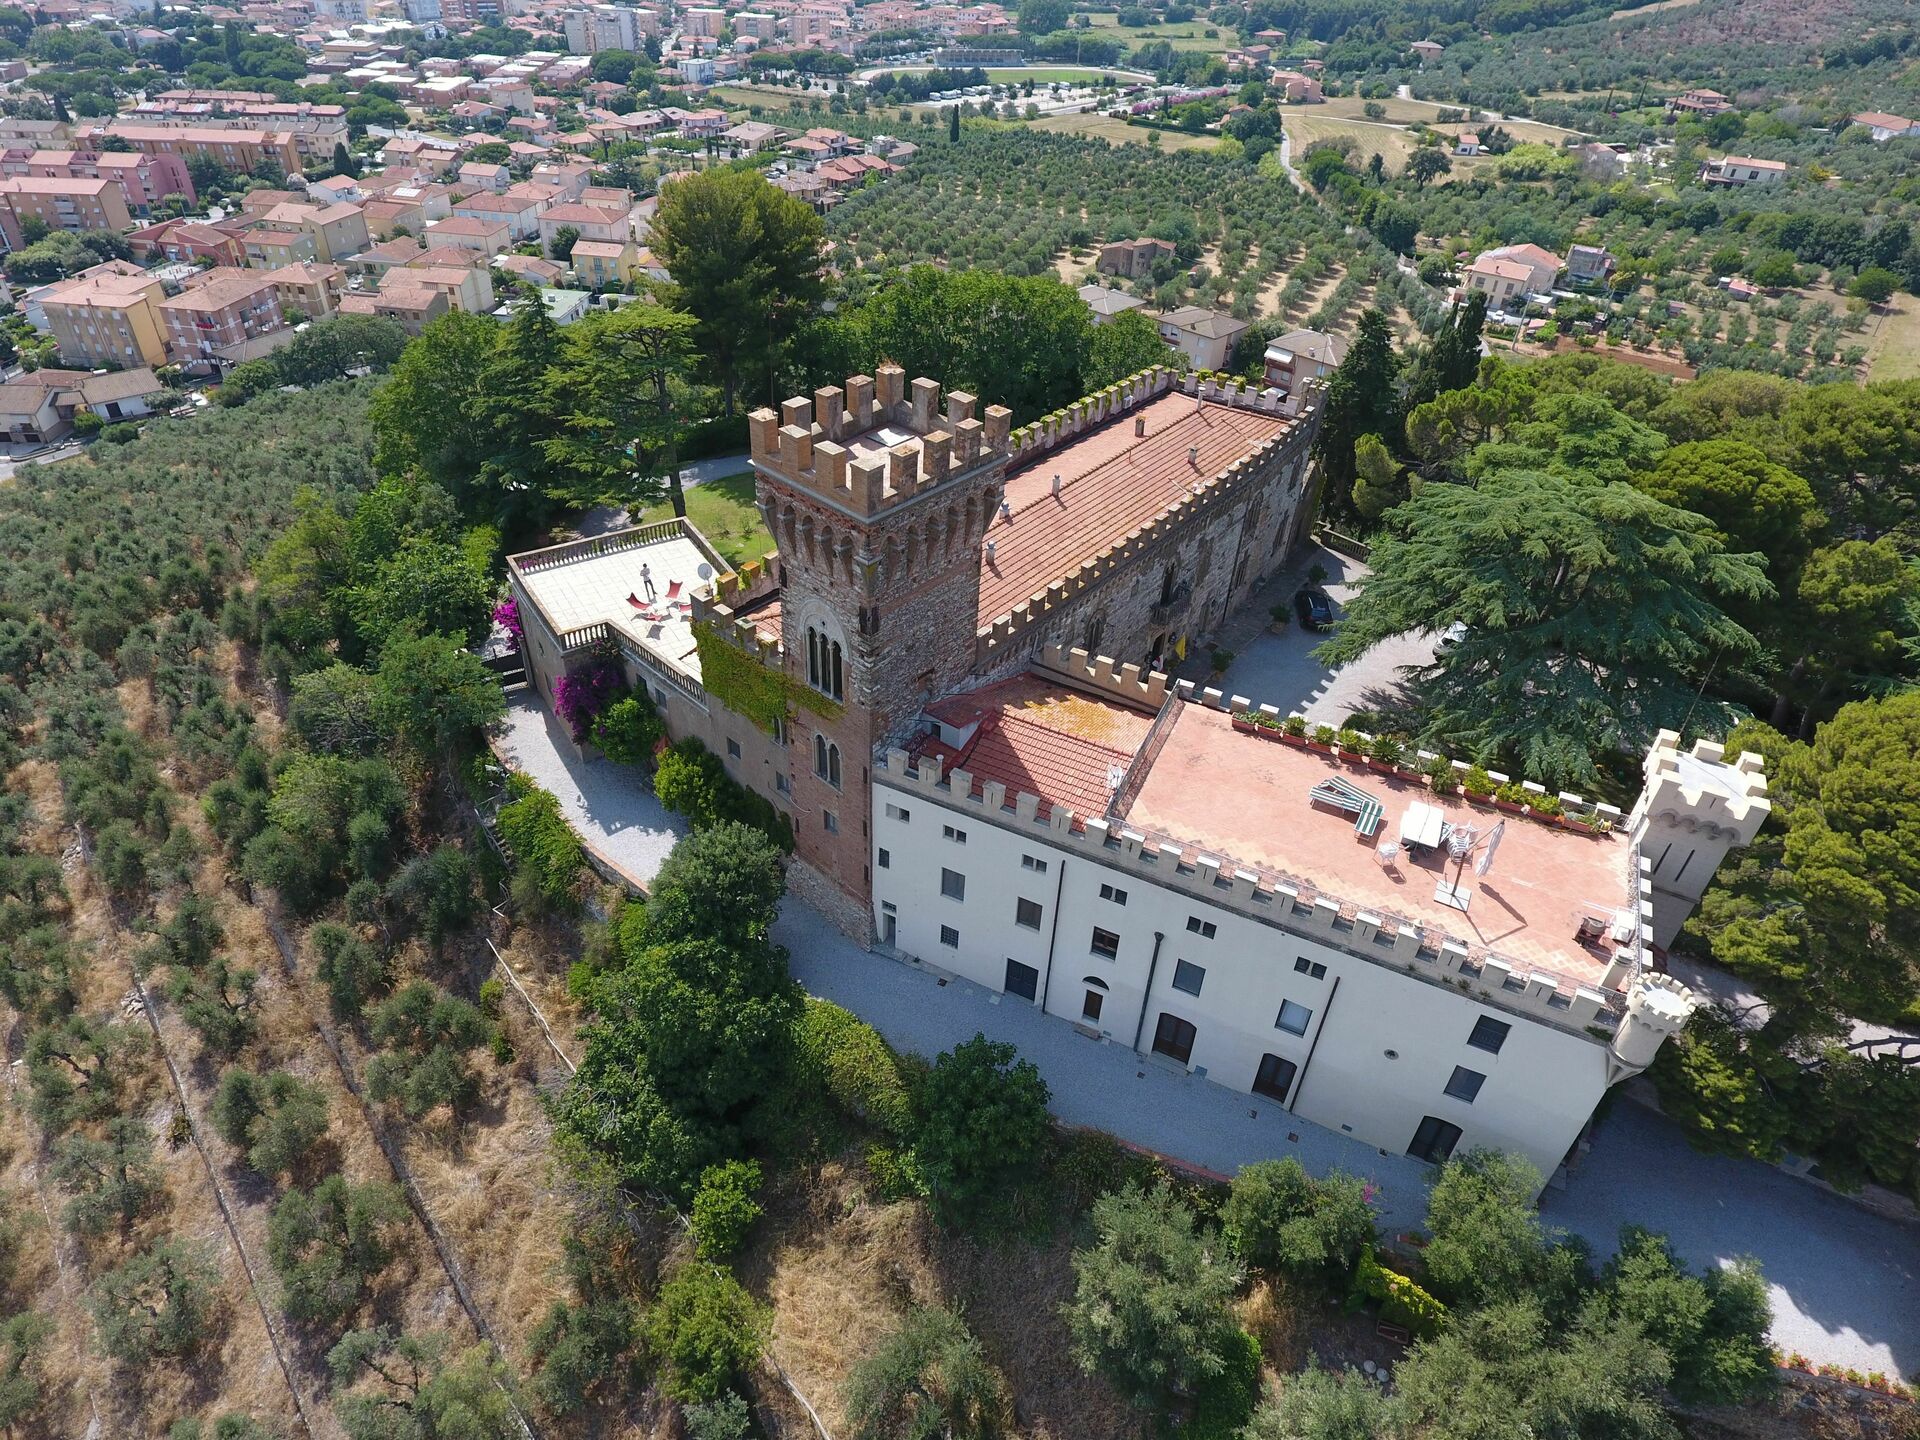 Wedding castle for rent Italy Tuscany